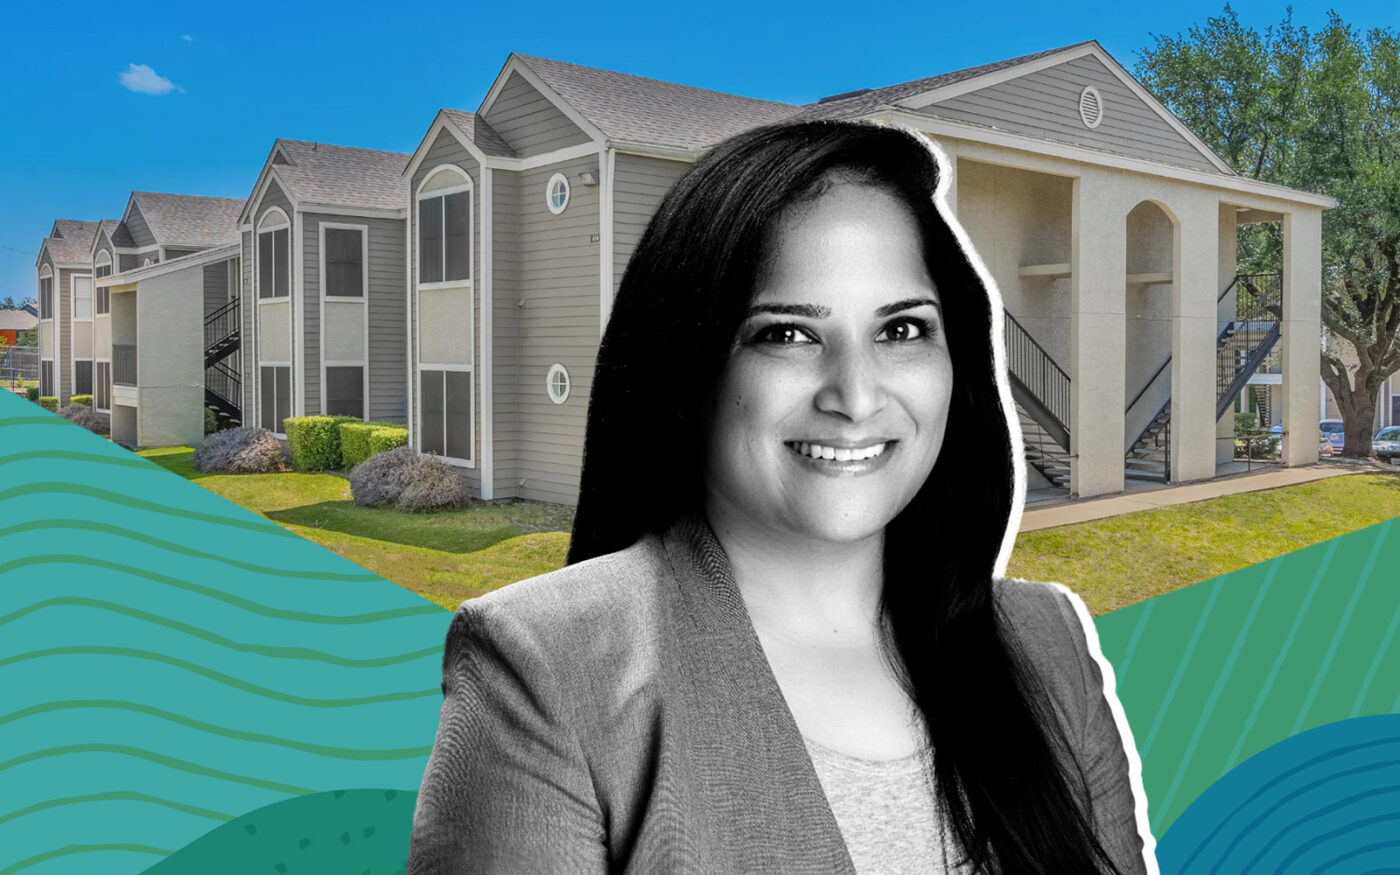 Elizabeth Property Group's Tisha Vaidya and the Woodglen Park Apartments at 6800 South Cockrell Hill Road in Dallas